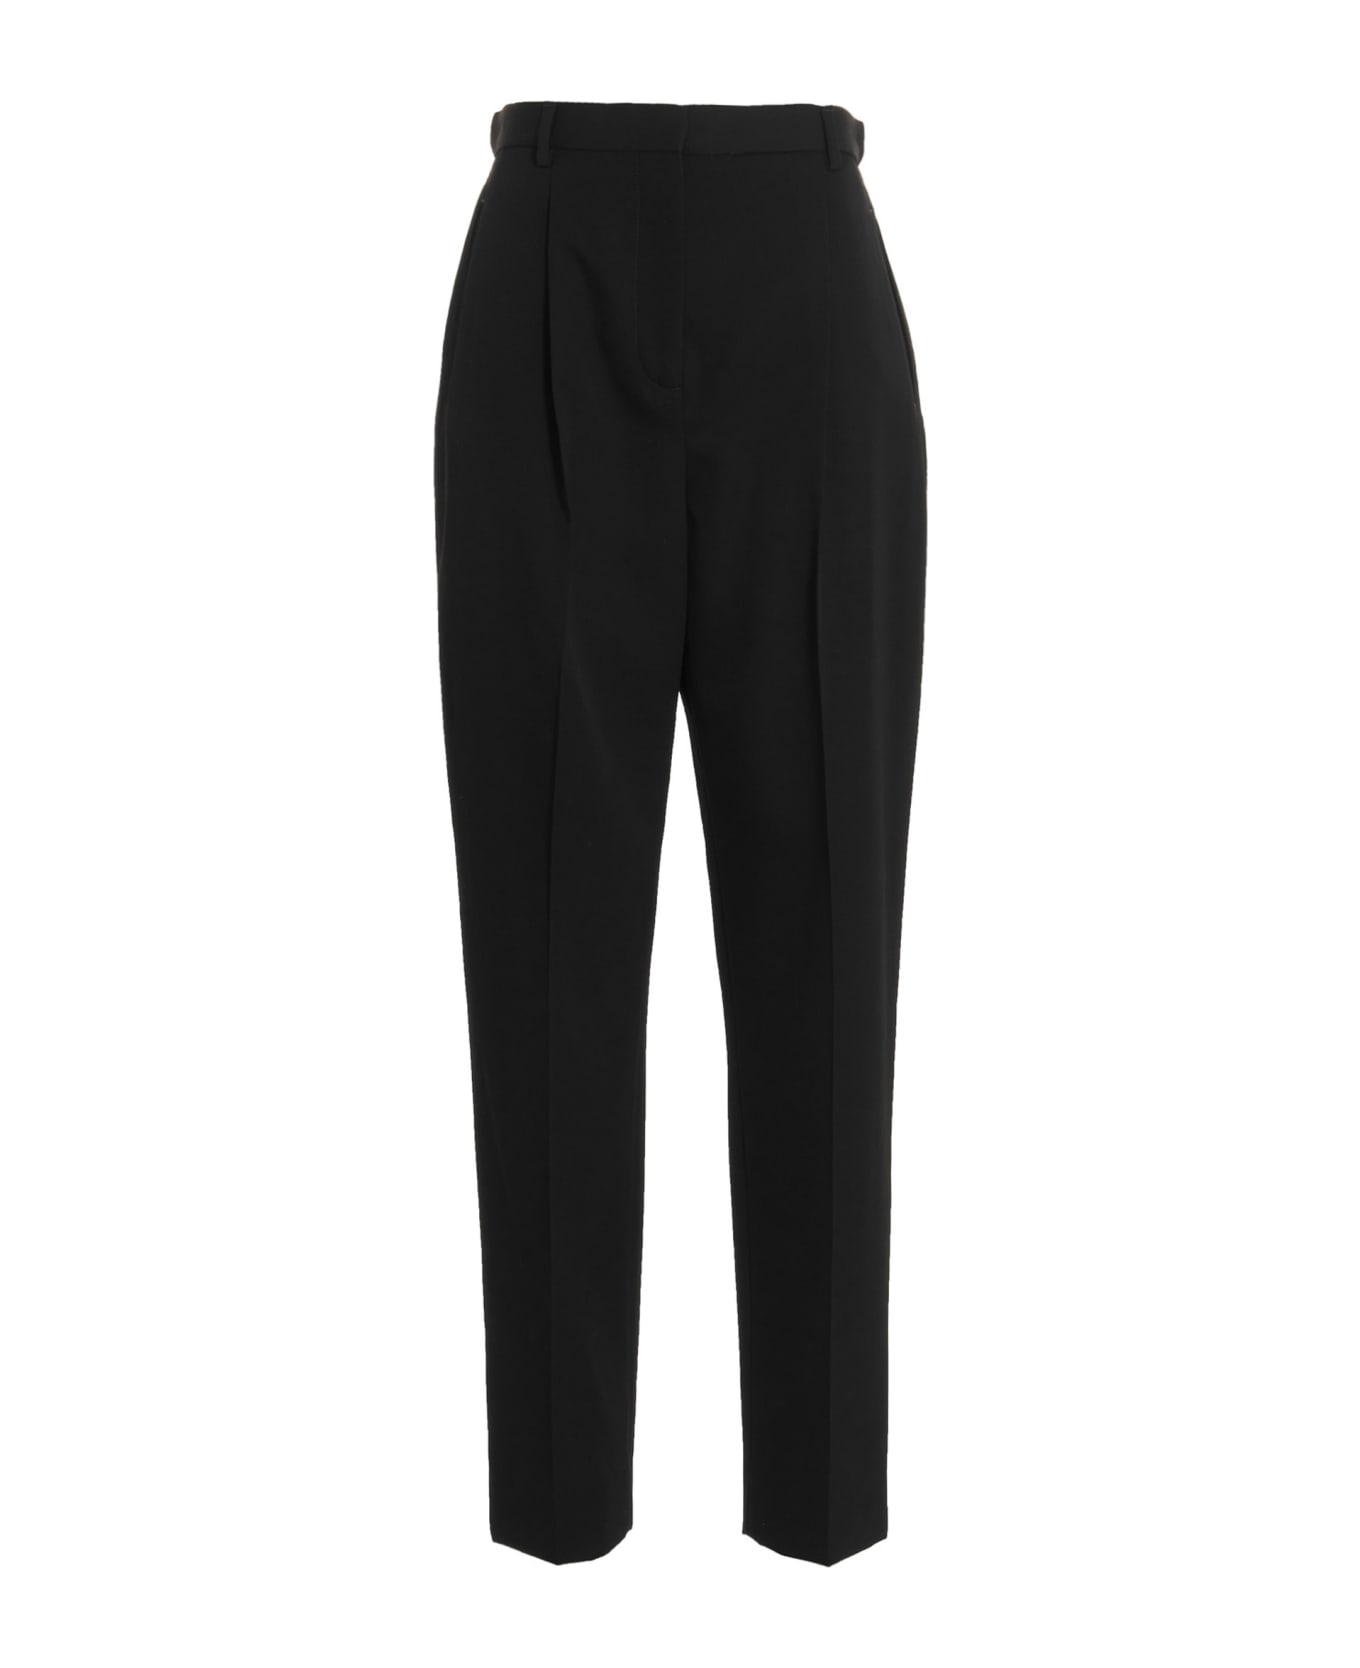 Tory Burch Wool Twilled Tailored Trousers - NERO ボトムス